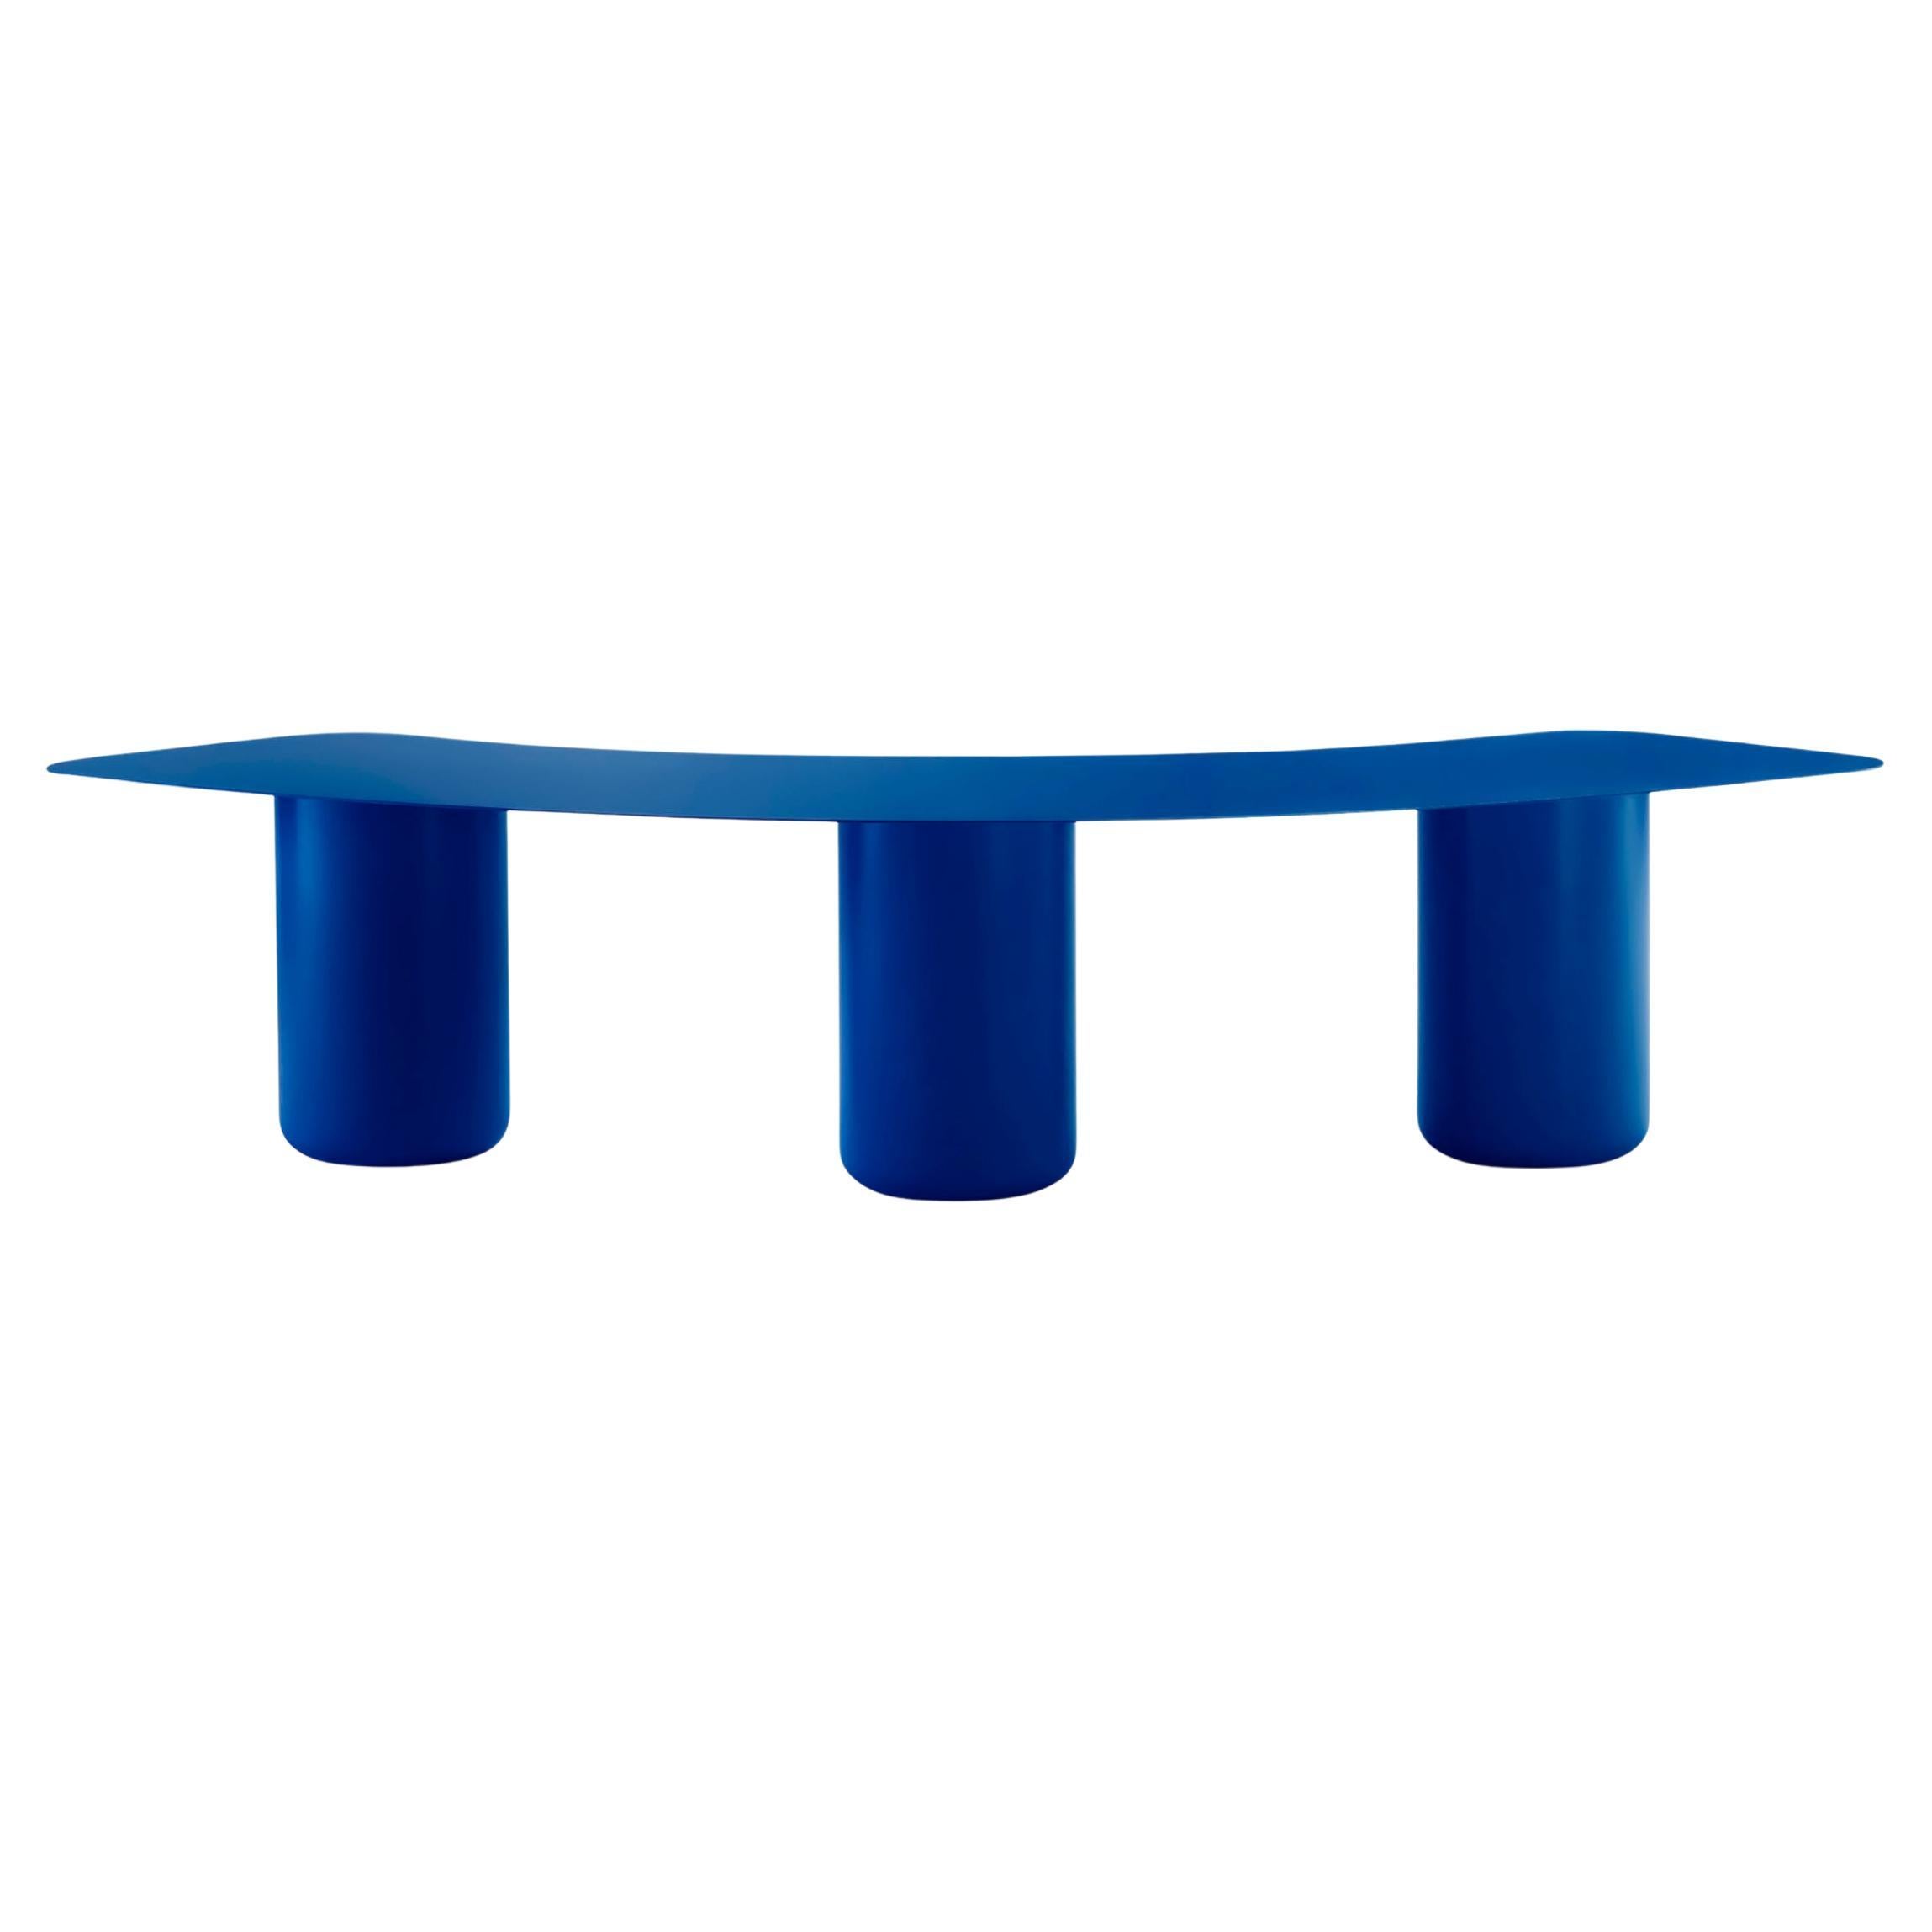 Large Vivid Blue Curved Bench by Coco Flip